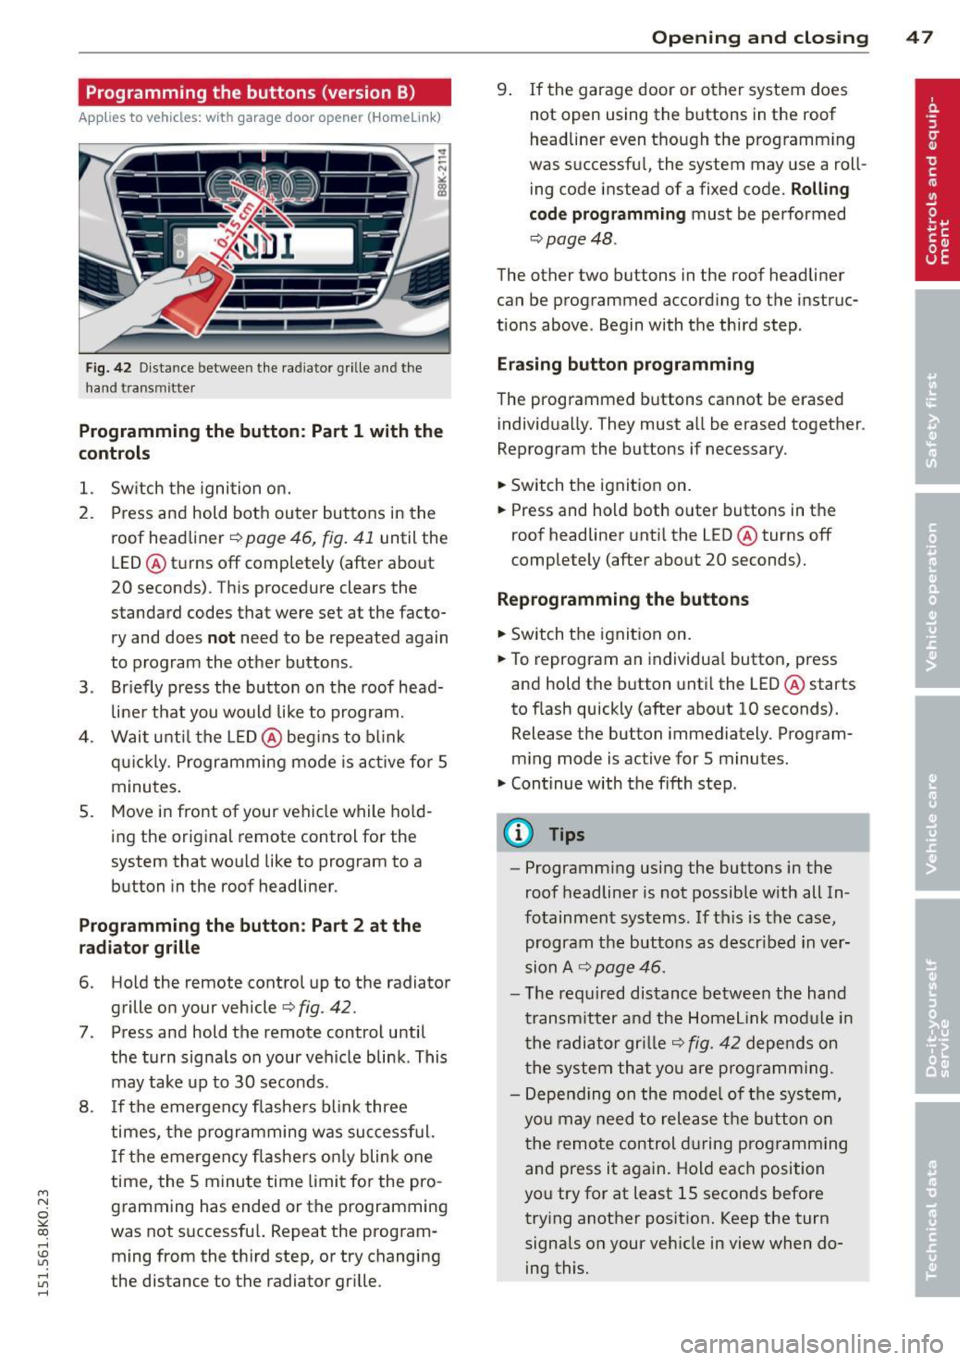 AUDI A4 2015  Owners Manual M N 
~ co 
rl I.O 
" rl 
" rl 
Programming  the  buttons (version B) 
Applies  to vehicles:  with  garage door  opener  (Homelink) 
Fig. 42 D ista nce betwee n the  radiator  gr ille  a nd t he 
han